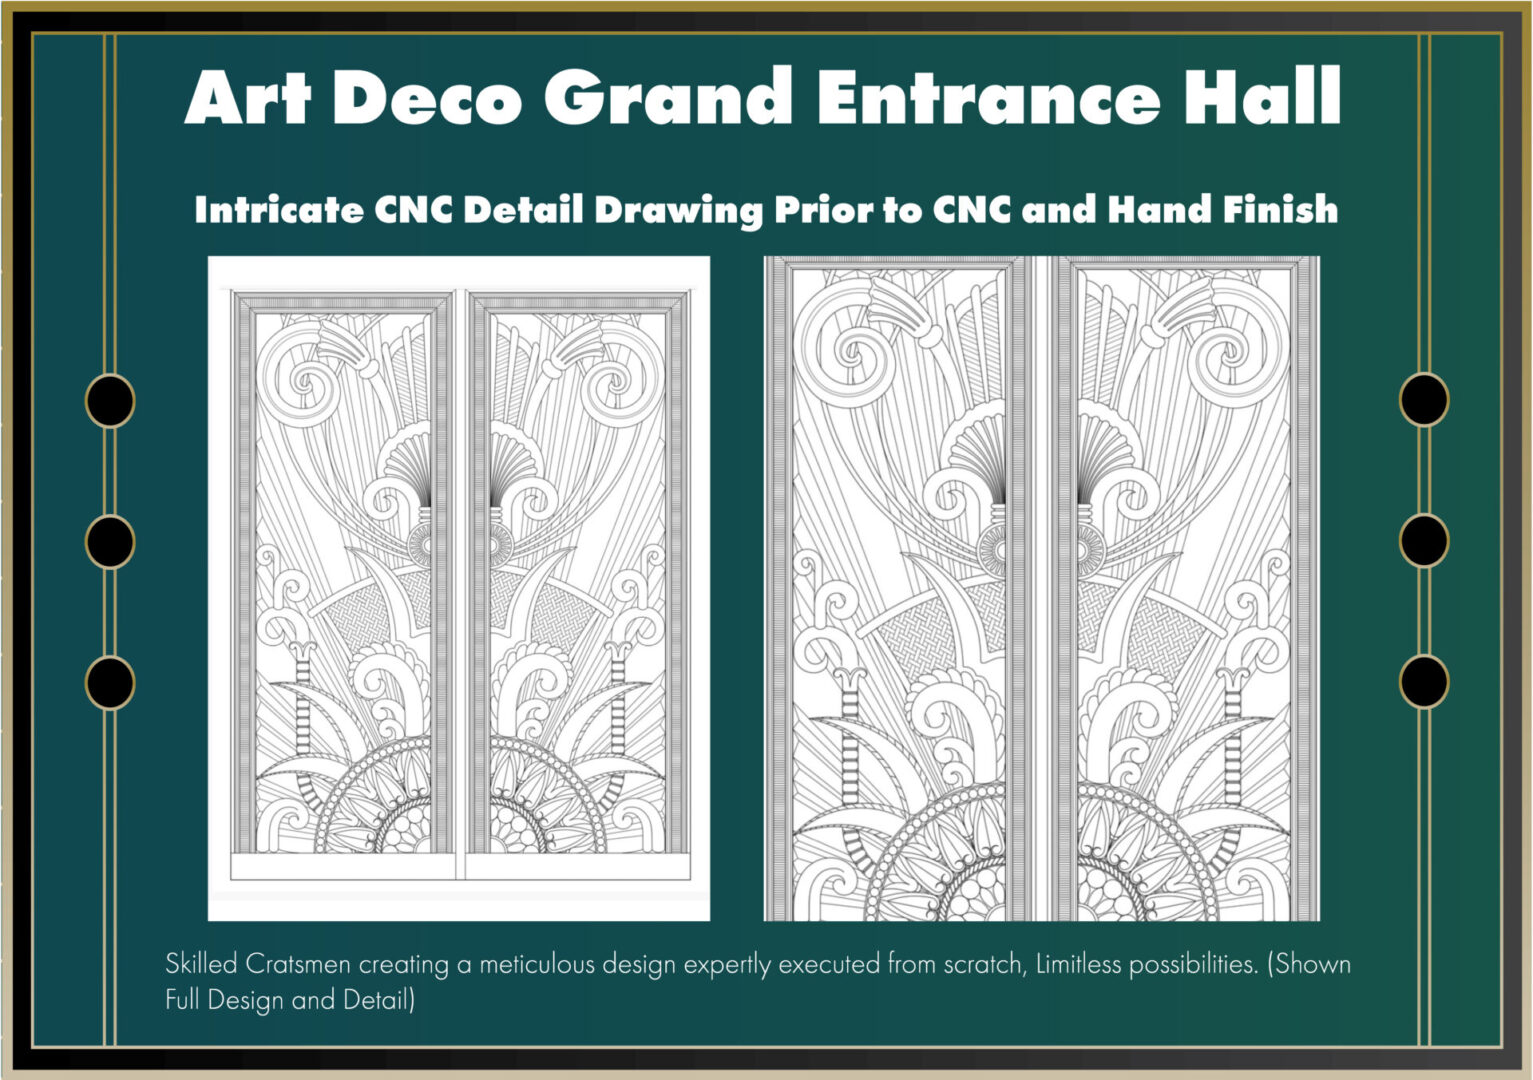 Art Deco Grand Entrance Hall with Intricate CNC Detail